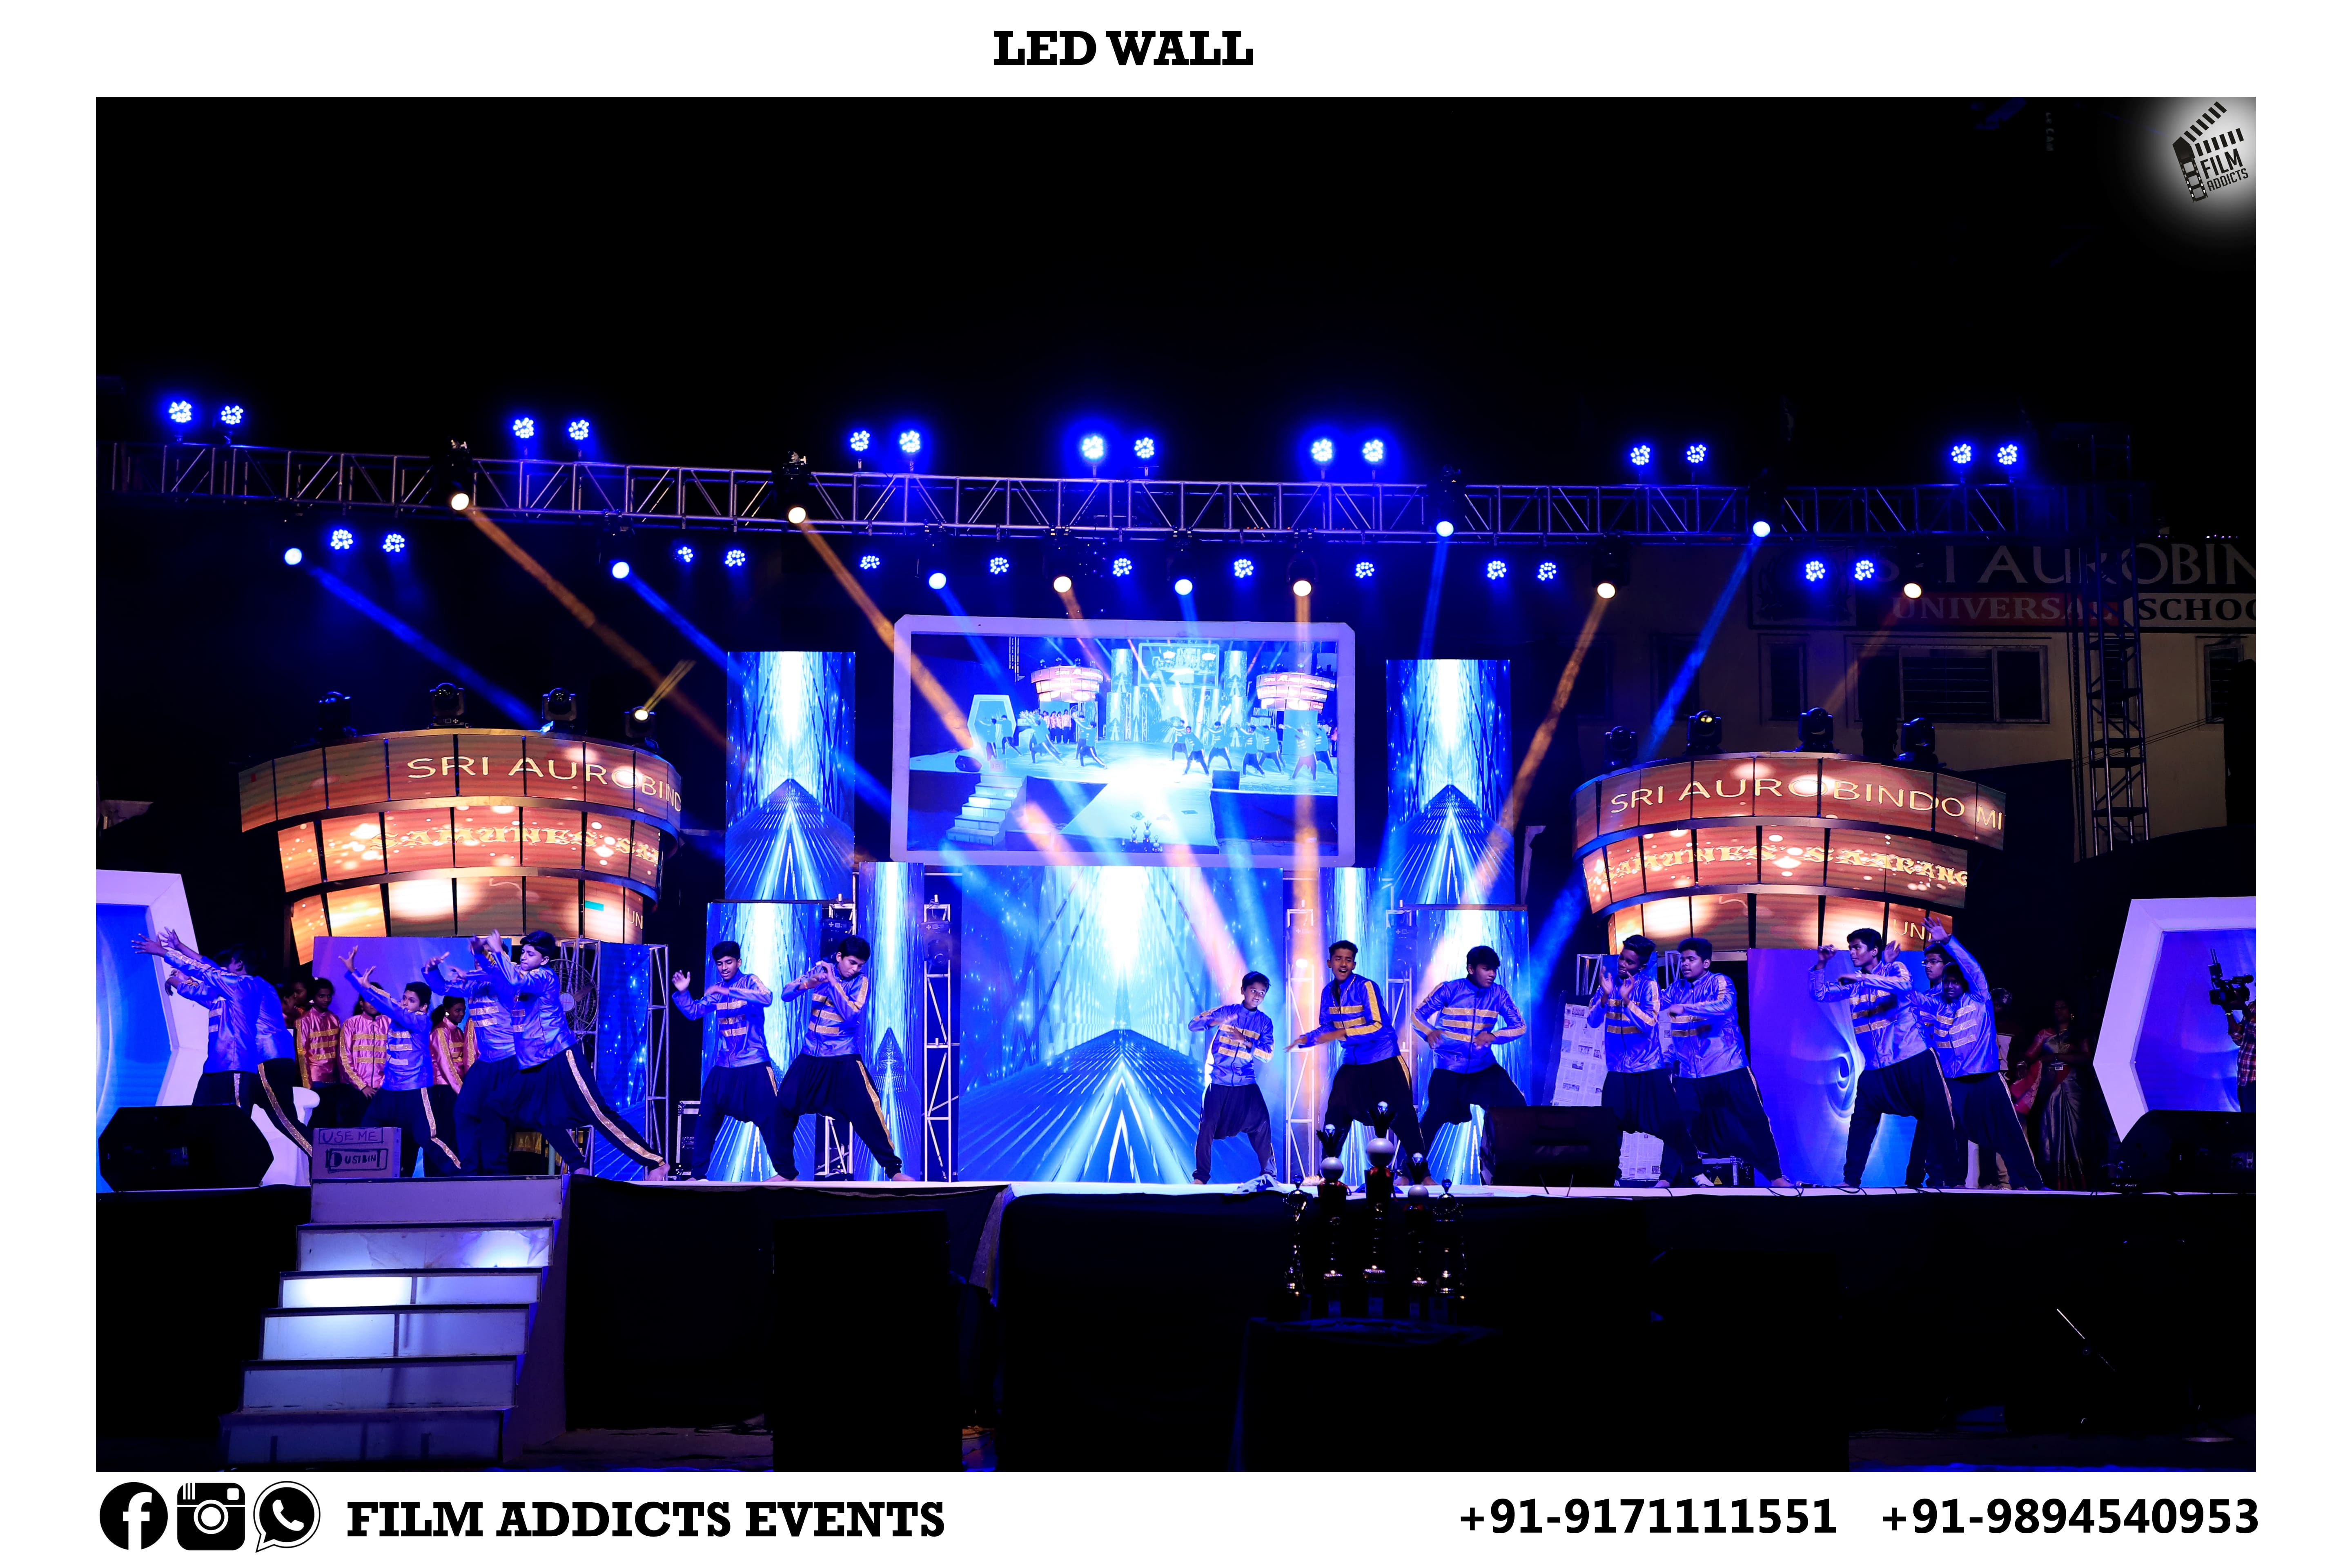 Best LED Video Wall Rental Services in Theni, Best LED Wall Services In Theni ,Best LED Wall Rental Services In Theni, Best Budget LED Wall Rental  Services in Theni, Best Wedding LED Wall Rentals In Theni, Best clarity in led wall rentals in Theni, Best cost-effective display rentals in Theni, Best crisp, bright, high resolution led video services in Theni, Best led wall rental services in Theni, Best tailored lighting, vision and sound solutions led rentals in Theni, Best outstanding new LED panels rental Service in Theni, Best Indoor and Outdoor LED panels rental Service in Theni, Best high resolution LED display rental Service in Theni, Best Wedding LED wall rentals in Theni, Best Grand wedding LED wall rentals in Theni, Best LED wall rental Service in Theni, Best LED Video Services in Theni, Best Grand Wedding LED wall Renatls in Theni, Best LED wall Rentals for Grand Occasions in Theni, Best Wedding LED Video Services in Theni, Best Wedding LED video wall Rental Services in Theni, Best LED Video Wall Rentals for Grand Occassions in Theni, Best LED Video Wall Rentals for events in Theni, Best LED video Services for live events in Theni, Best video wall rentals for Live events in Theni, Best LED Video Wall Rentals for Live events in Theni, Best LED Video Wall On Hire in Theni, Best LED Video Wall Services in Theni, Best LED Video Wall Service Systems in Theni, Best LED Wall Washer Light Services in Theni, Best LED Wall Light Services in Theni, Best LED Wall Mount Bracket Services in Theni.